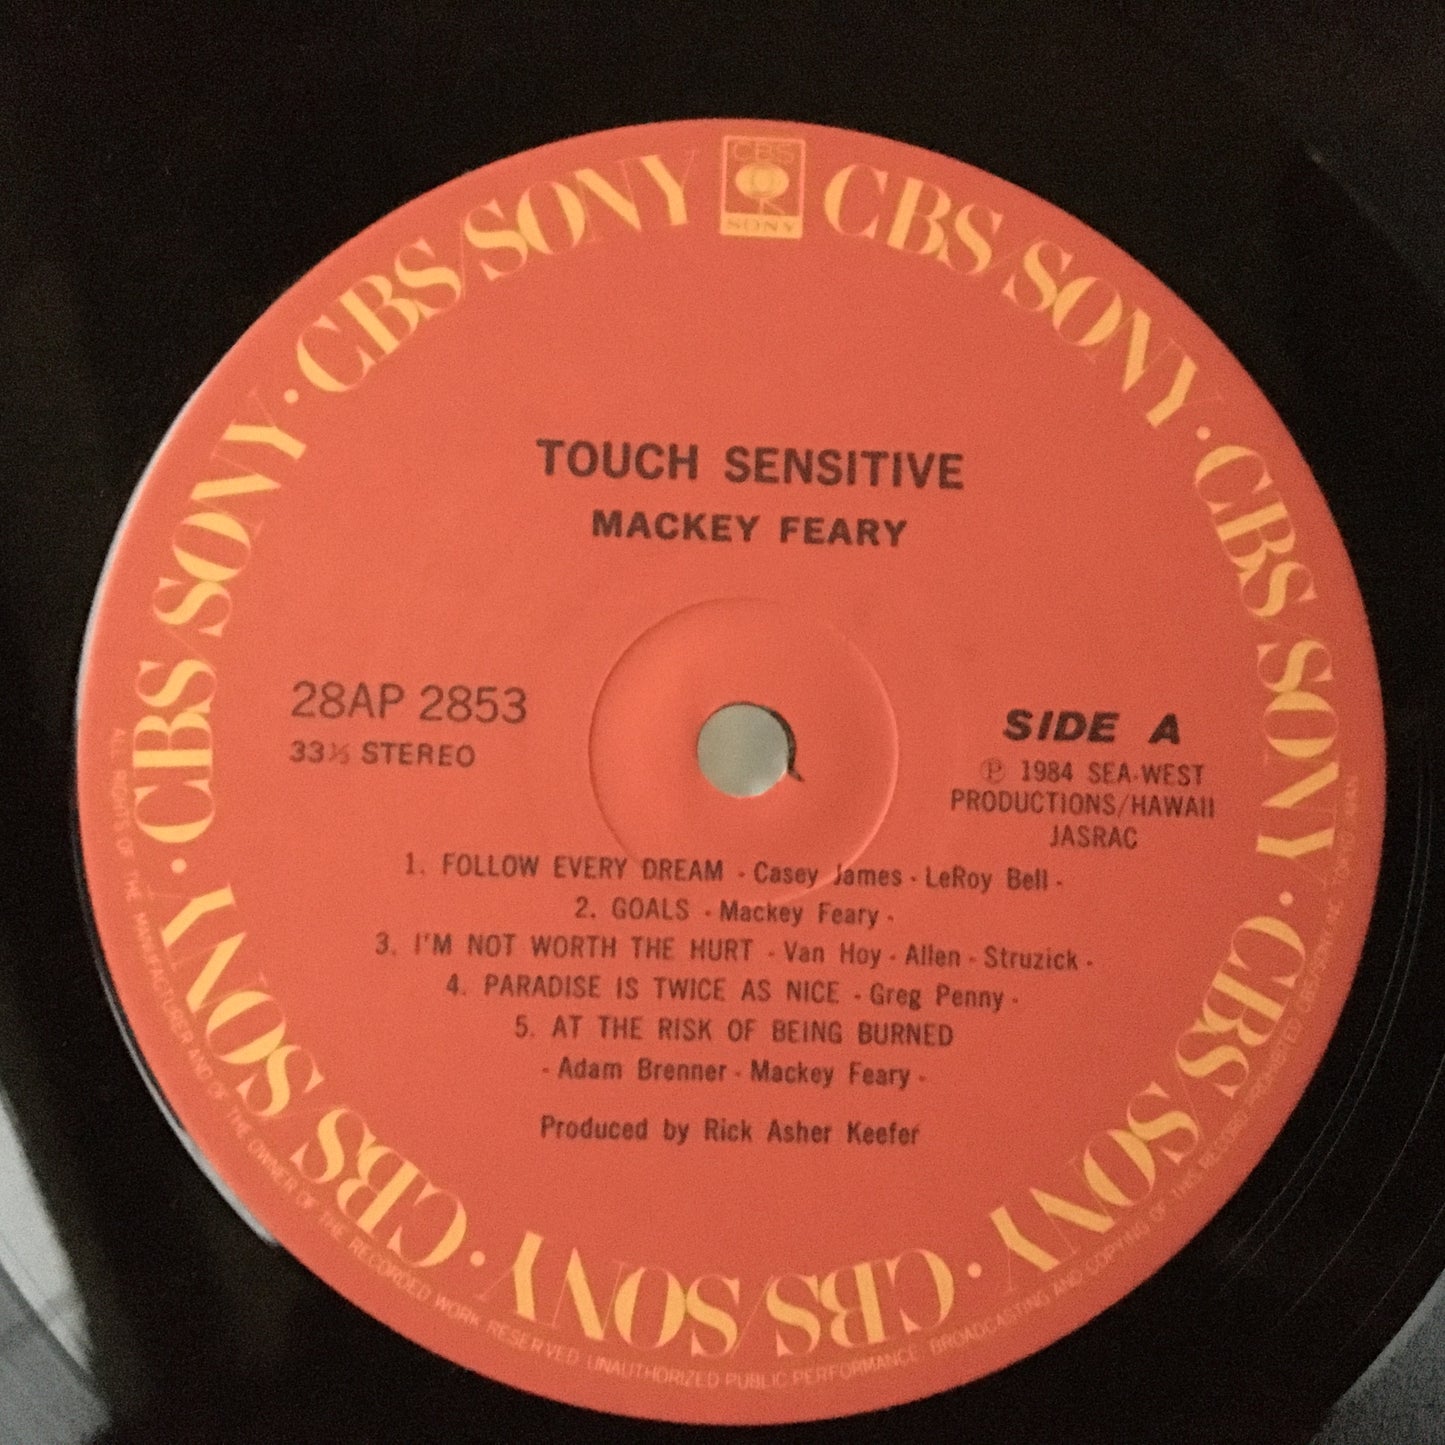 Mackey Feary – Touch Sensitive